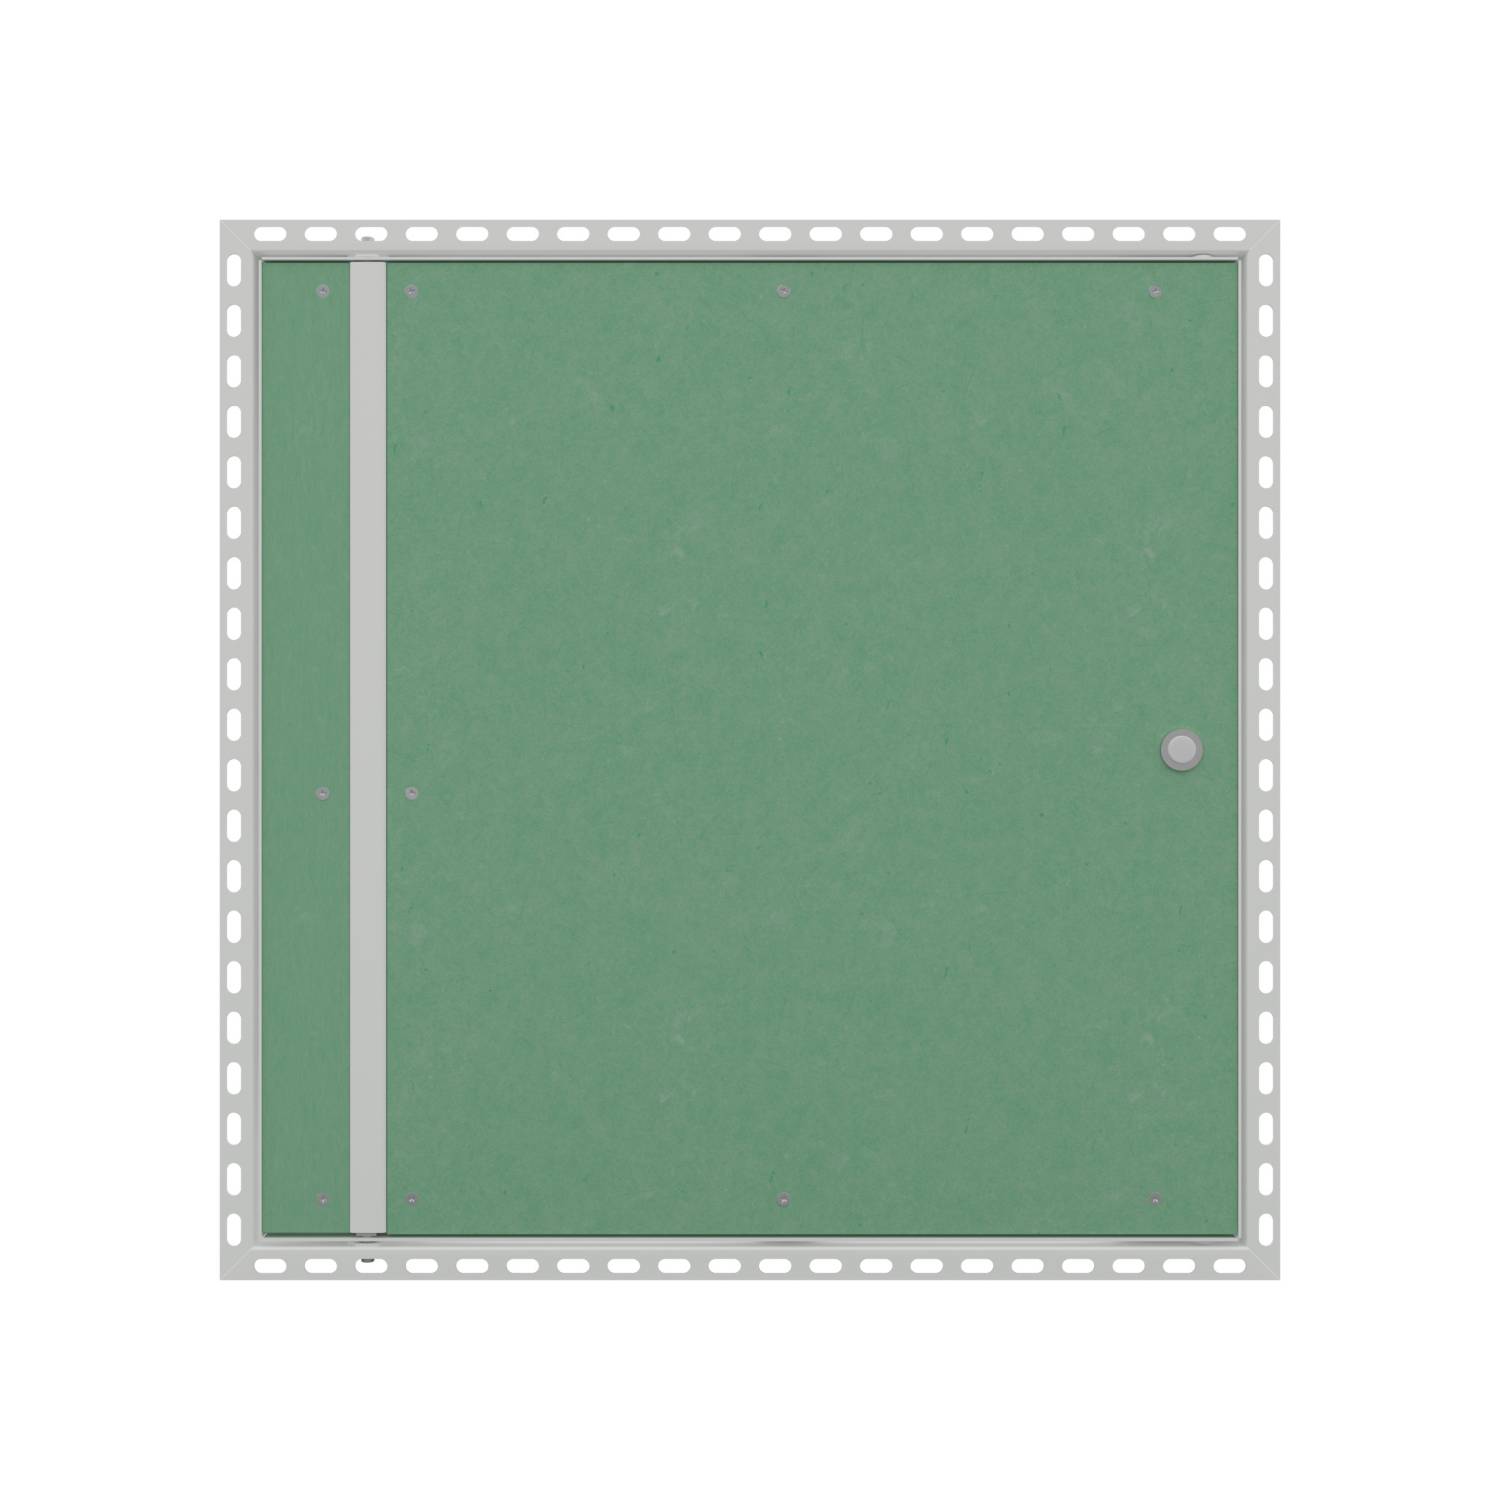 Ceramic Tiled Access Panel (EX08) - Beaded Frame - 1 Hour Fire Rated - Tiled Access Panel